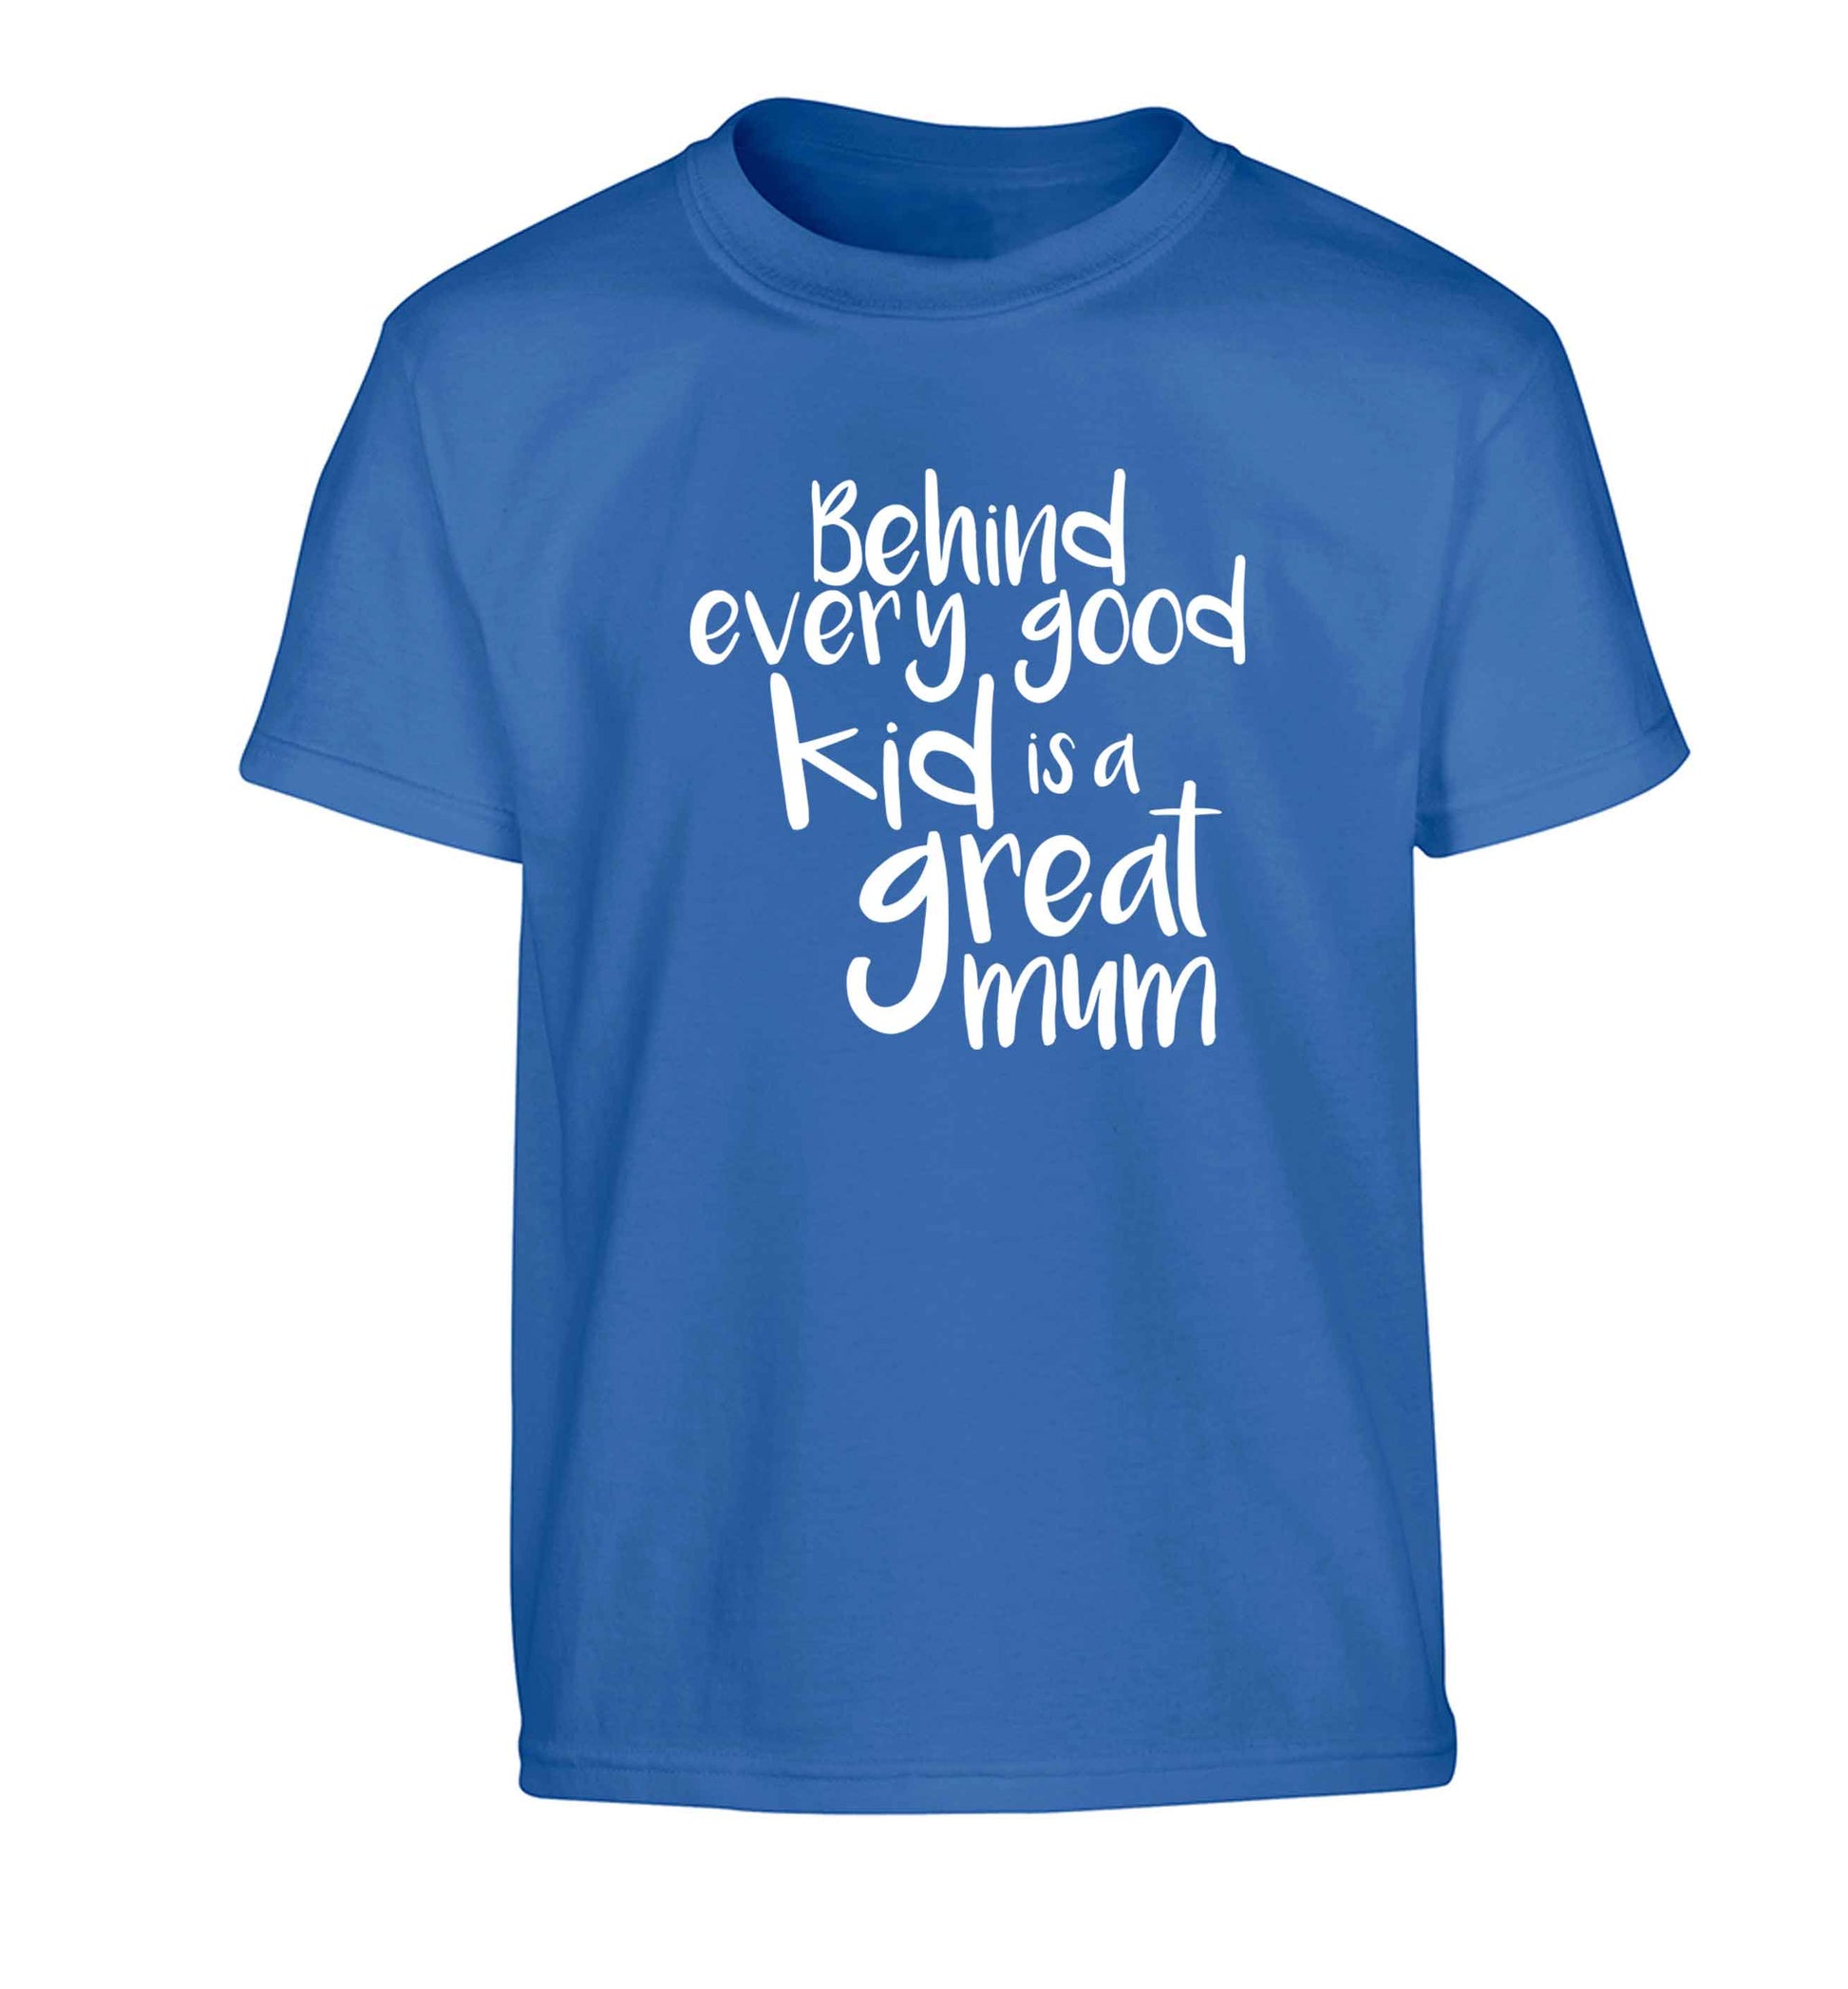 Behind every good kid is a great mum Children's blue Tshirt 12-13 Years